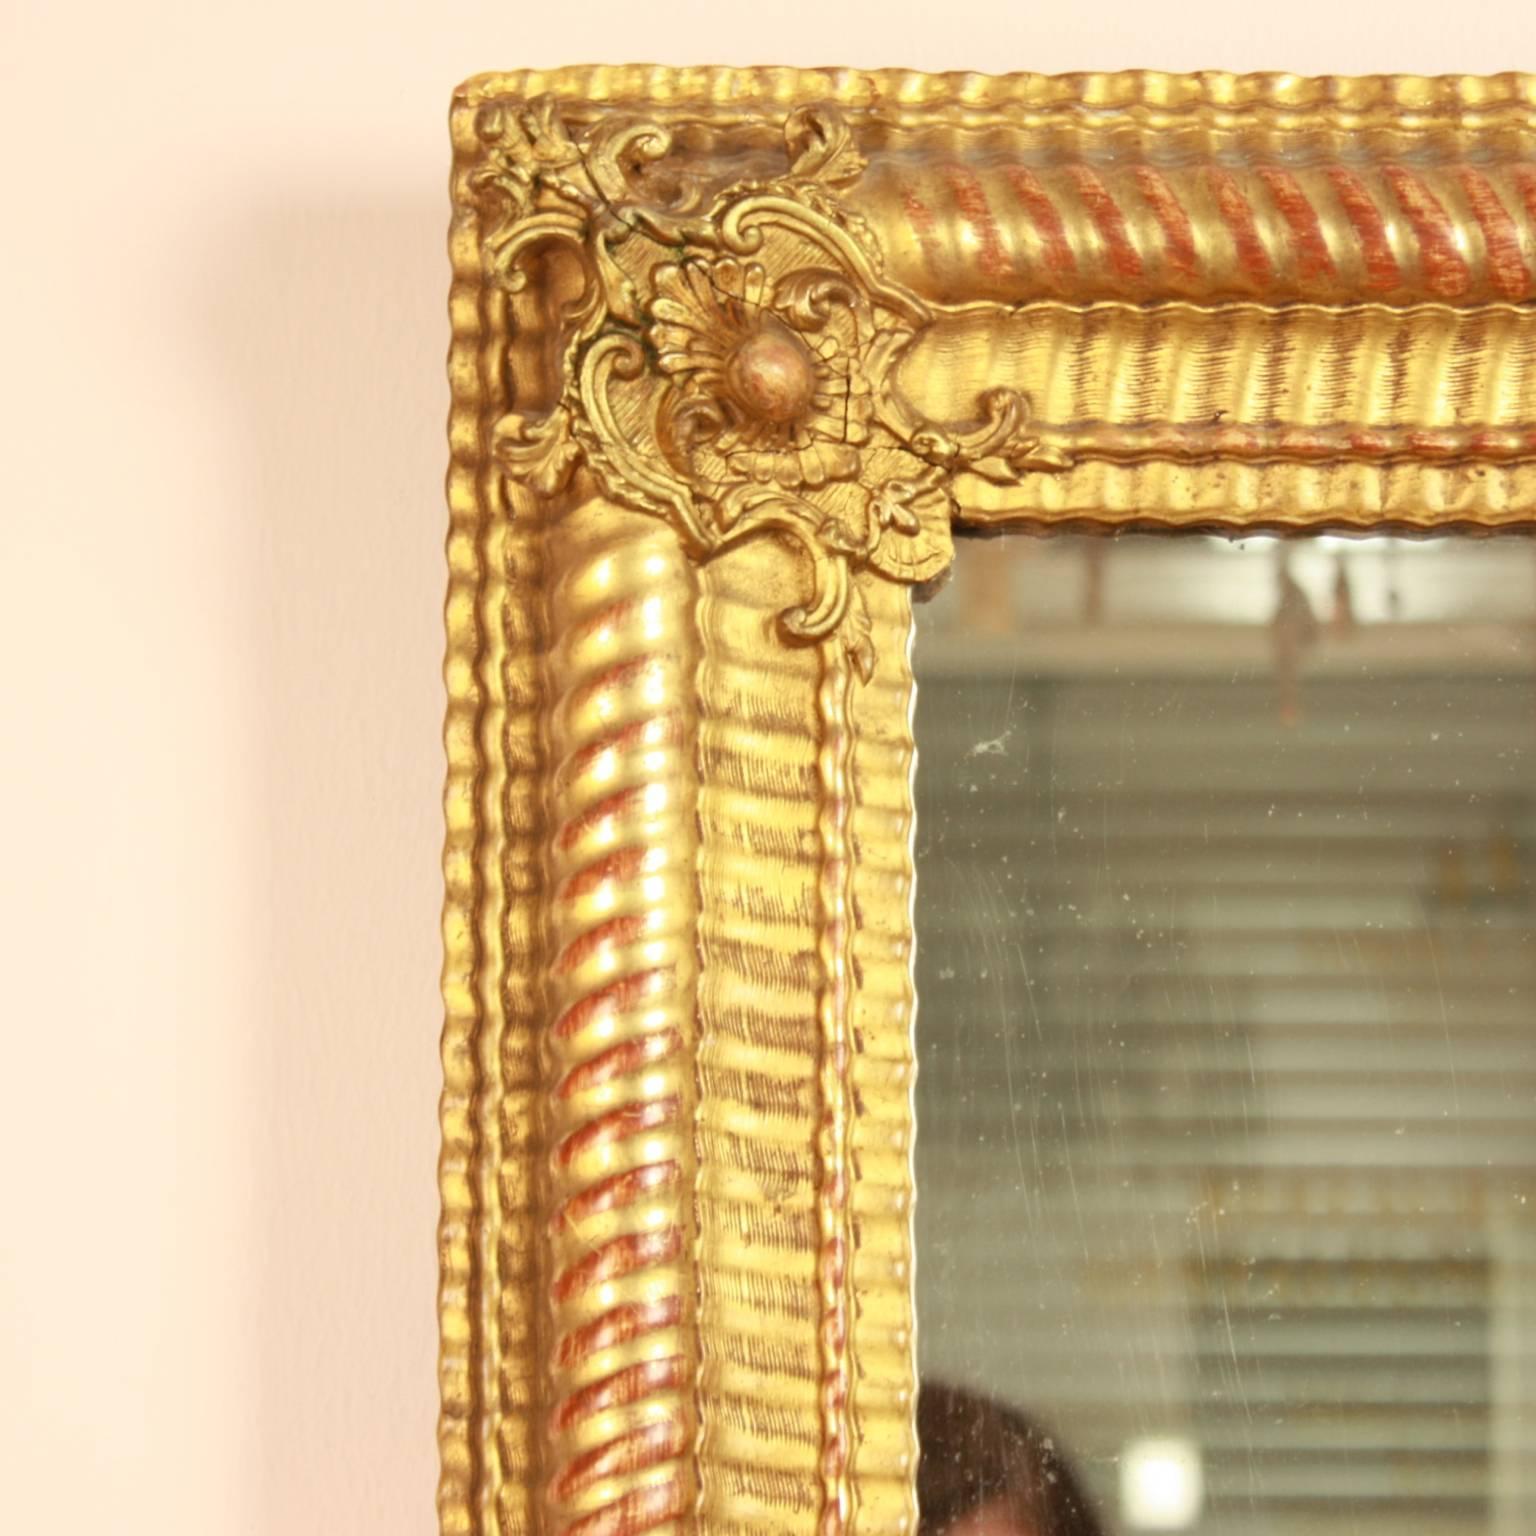 Large 19th century Baroque style wall mirror of rectangular shape with fine corner cartouches, the frame as such of undulating contour with a rope design. Fine gesso carving supports the evenly wavy form of the frame. Water gilding of polished and